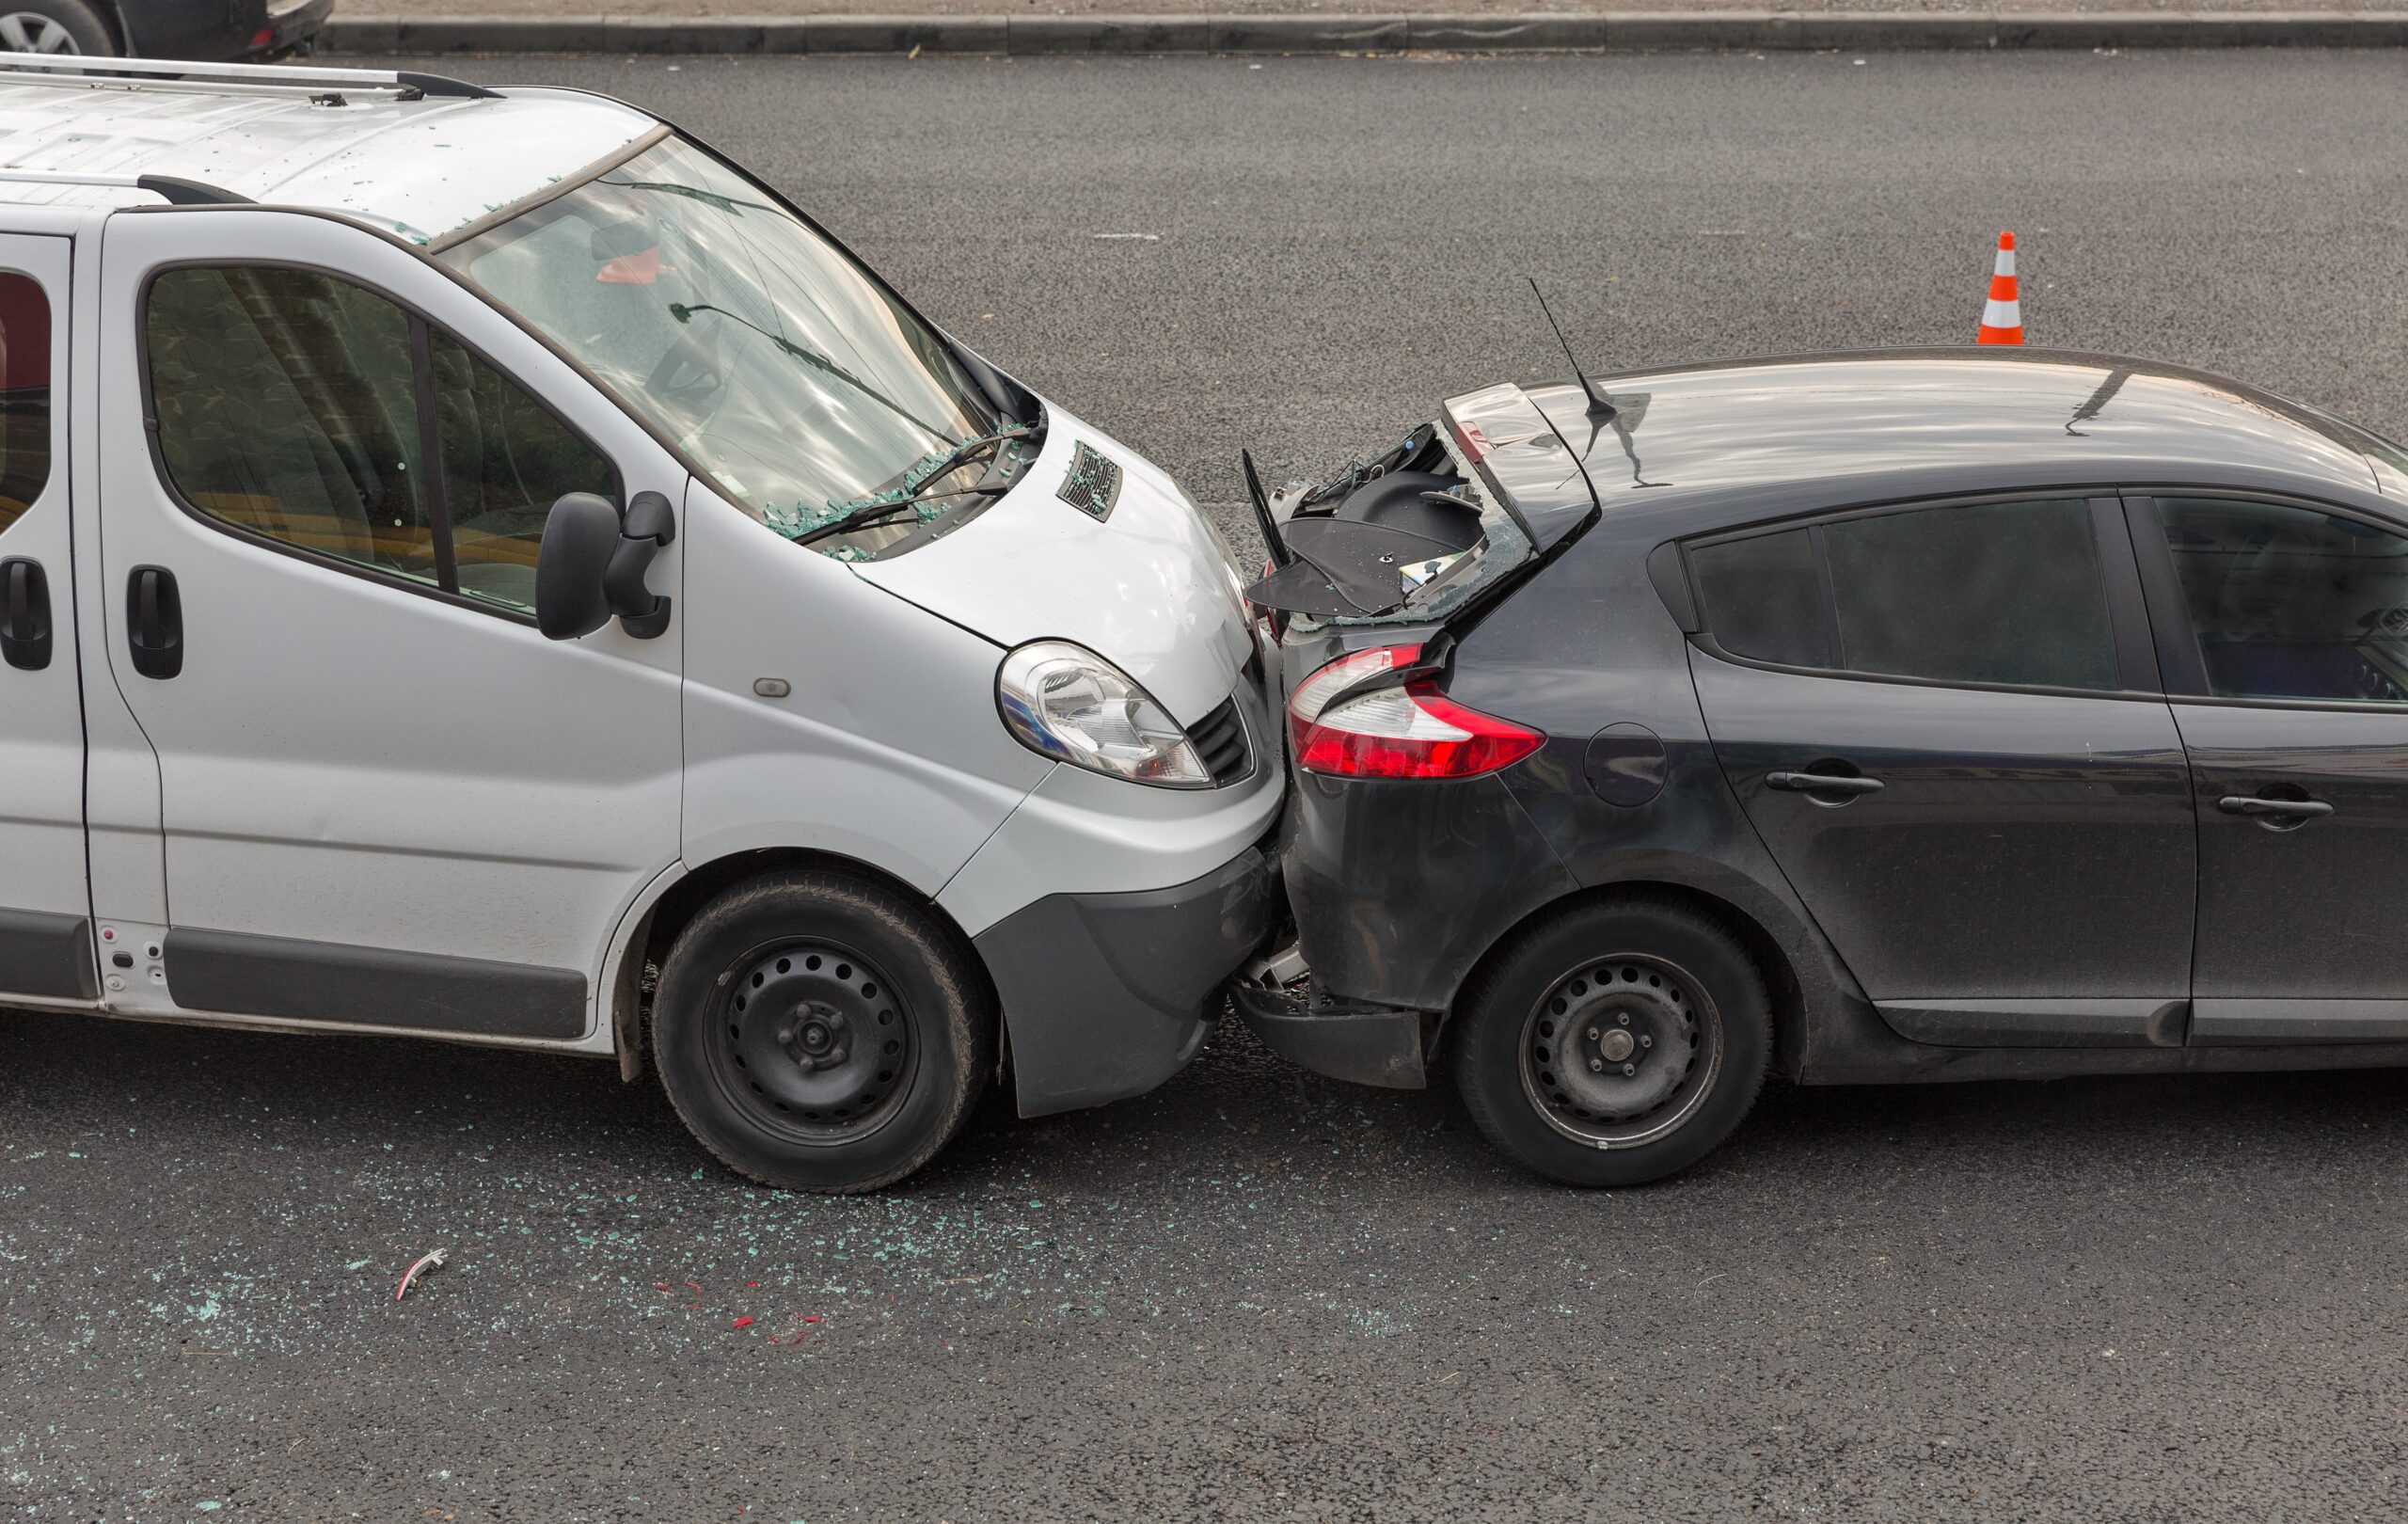 Common Injuries From Rear-End Car Accidents